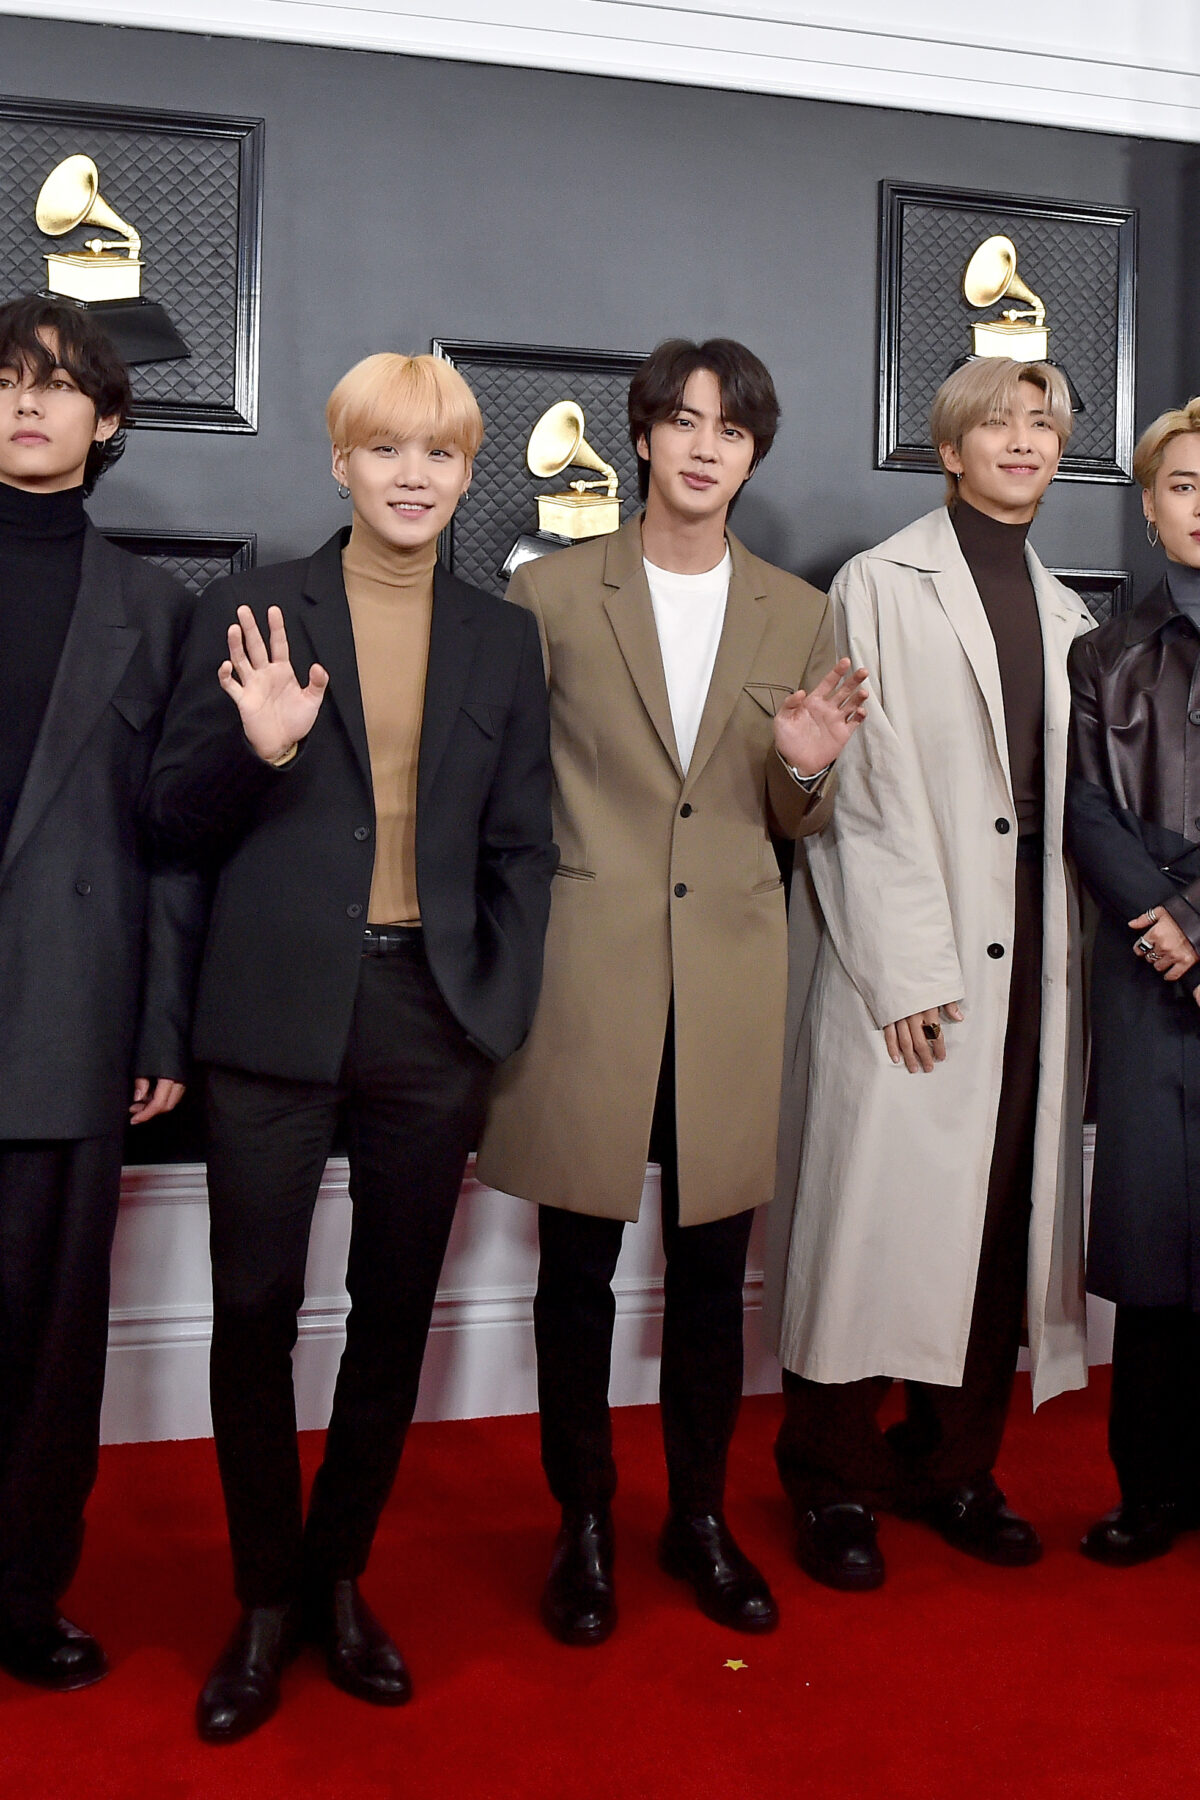 LOS ANGELES, CALIFORNIA - JANUARY 26: (L-R) Jungkook, V, Suga, Jin, RM, Jimin and J-Hope of music group BTS attend the 62nd Annual GRAMMY Awards at Staples Center on January 26, 2020 in Los Angeles, California. (Photo by Axelle/Bauer-Griffin/FilmMagic)